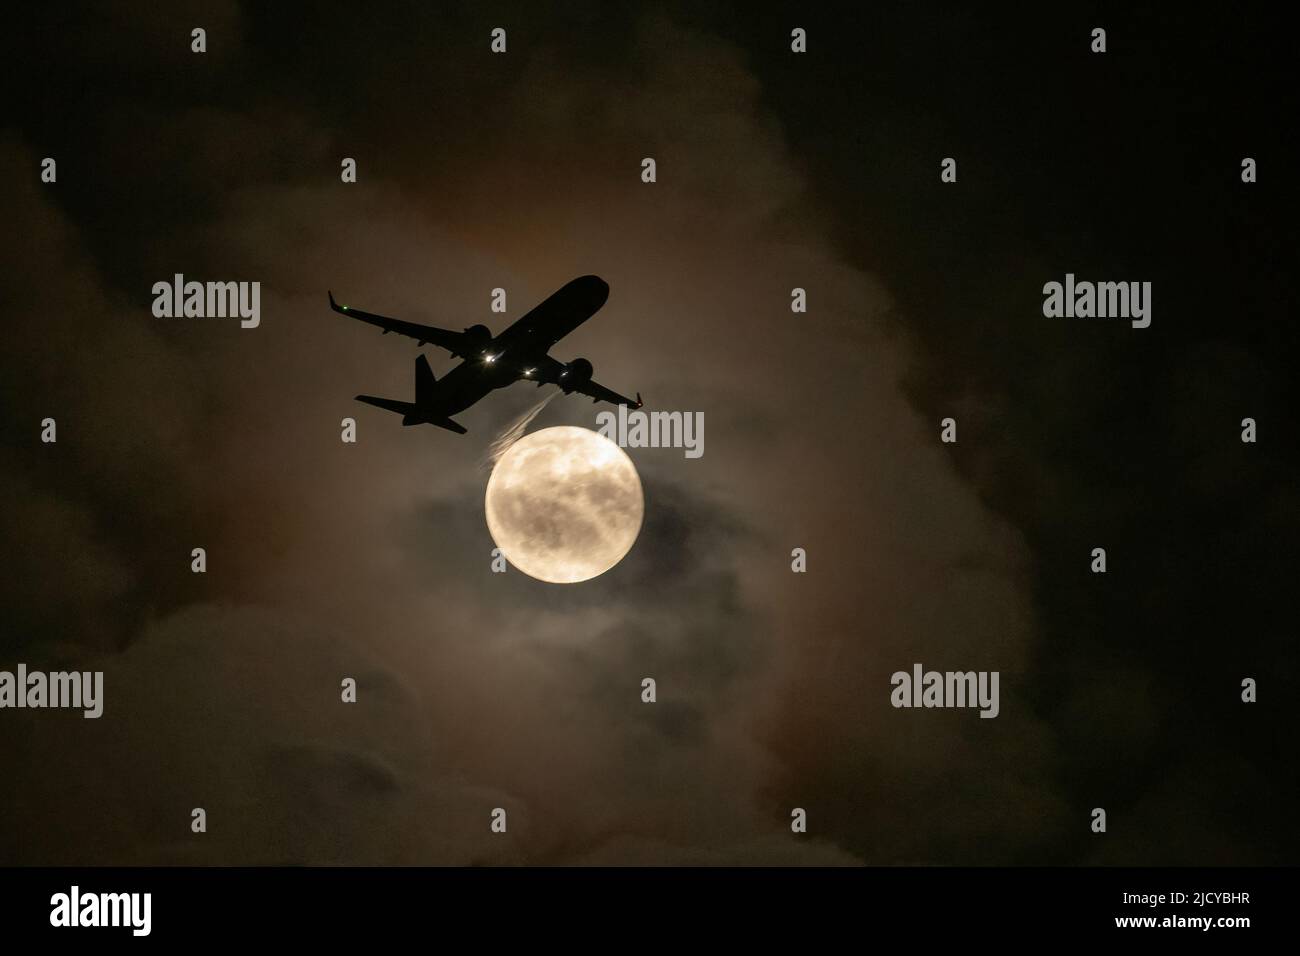 Aircraft flying in path of full moon at night Stock Photo